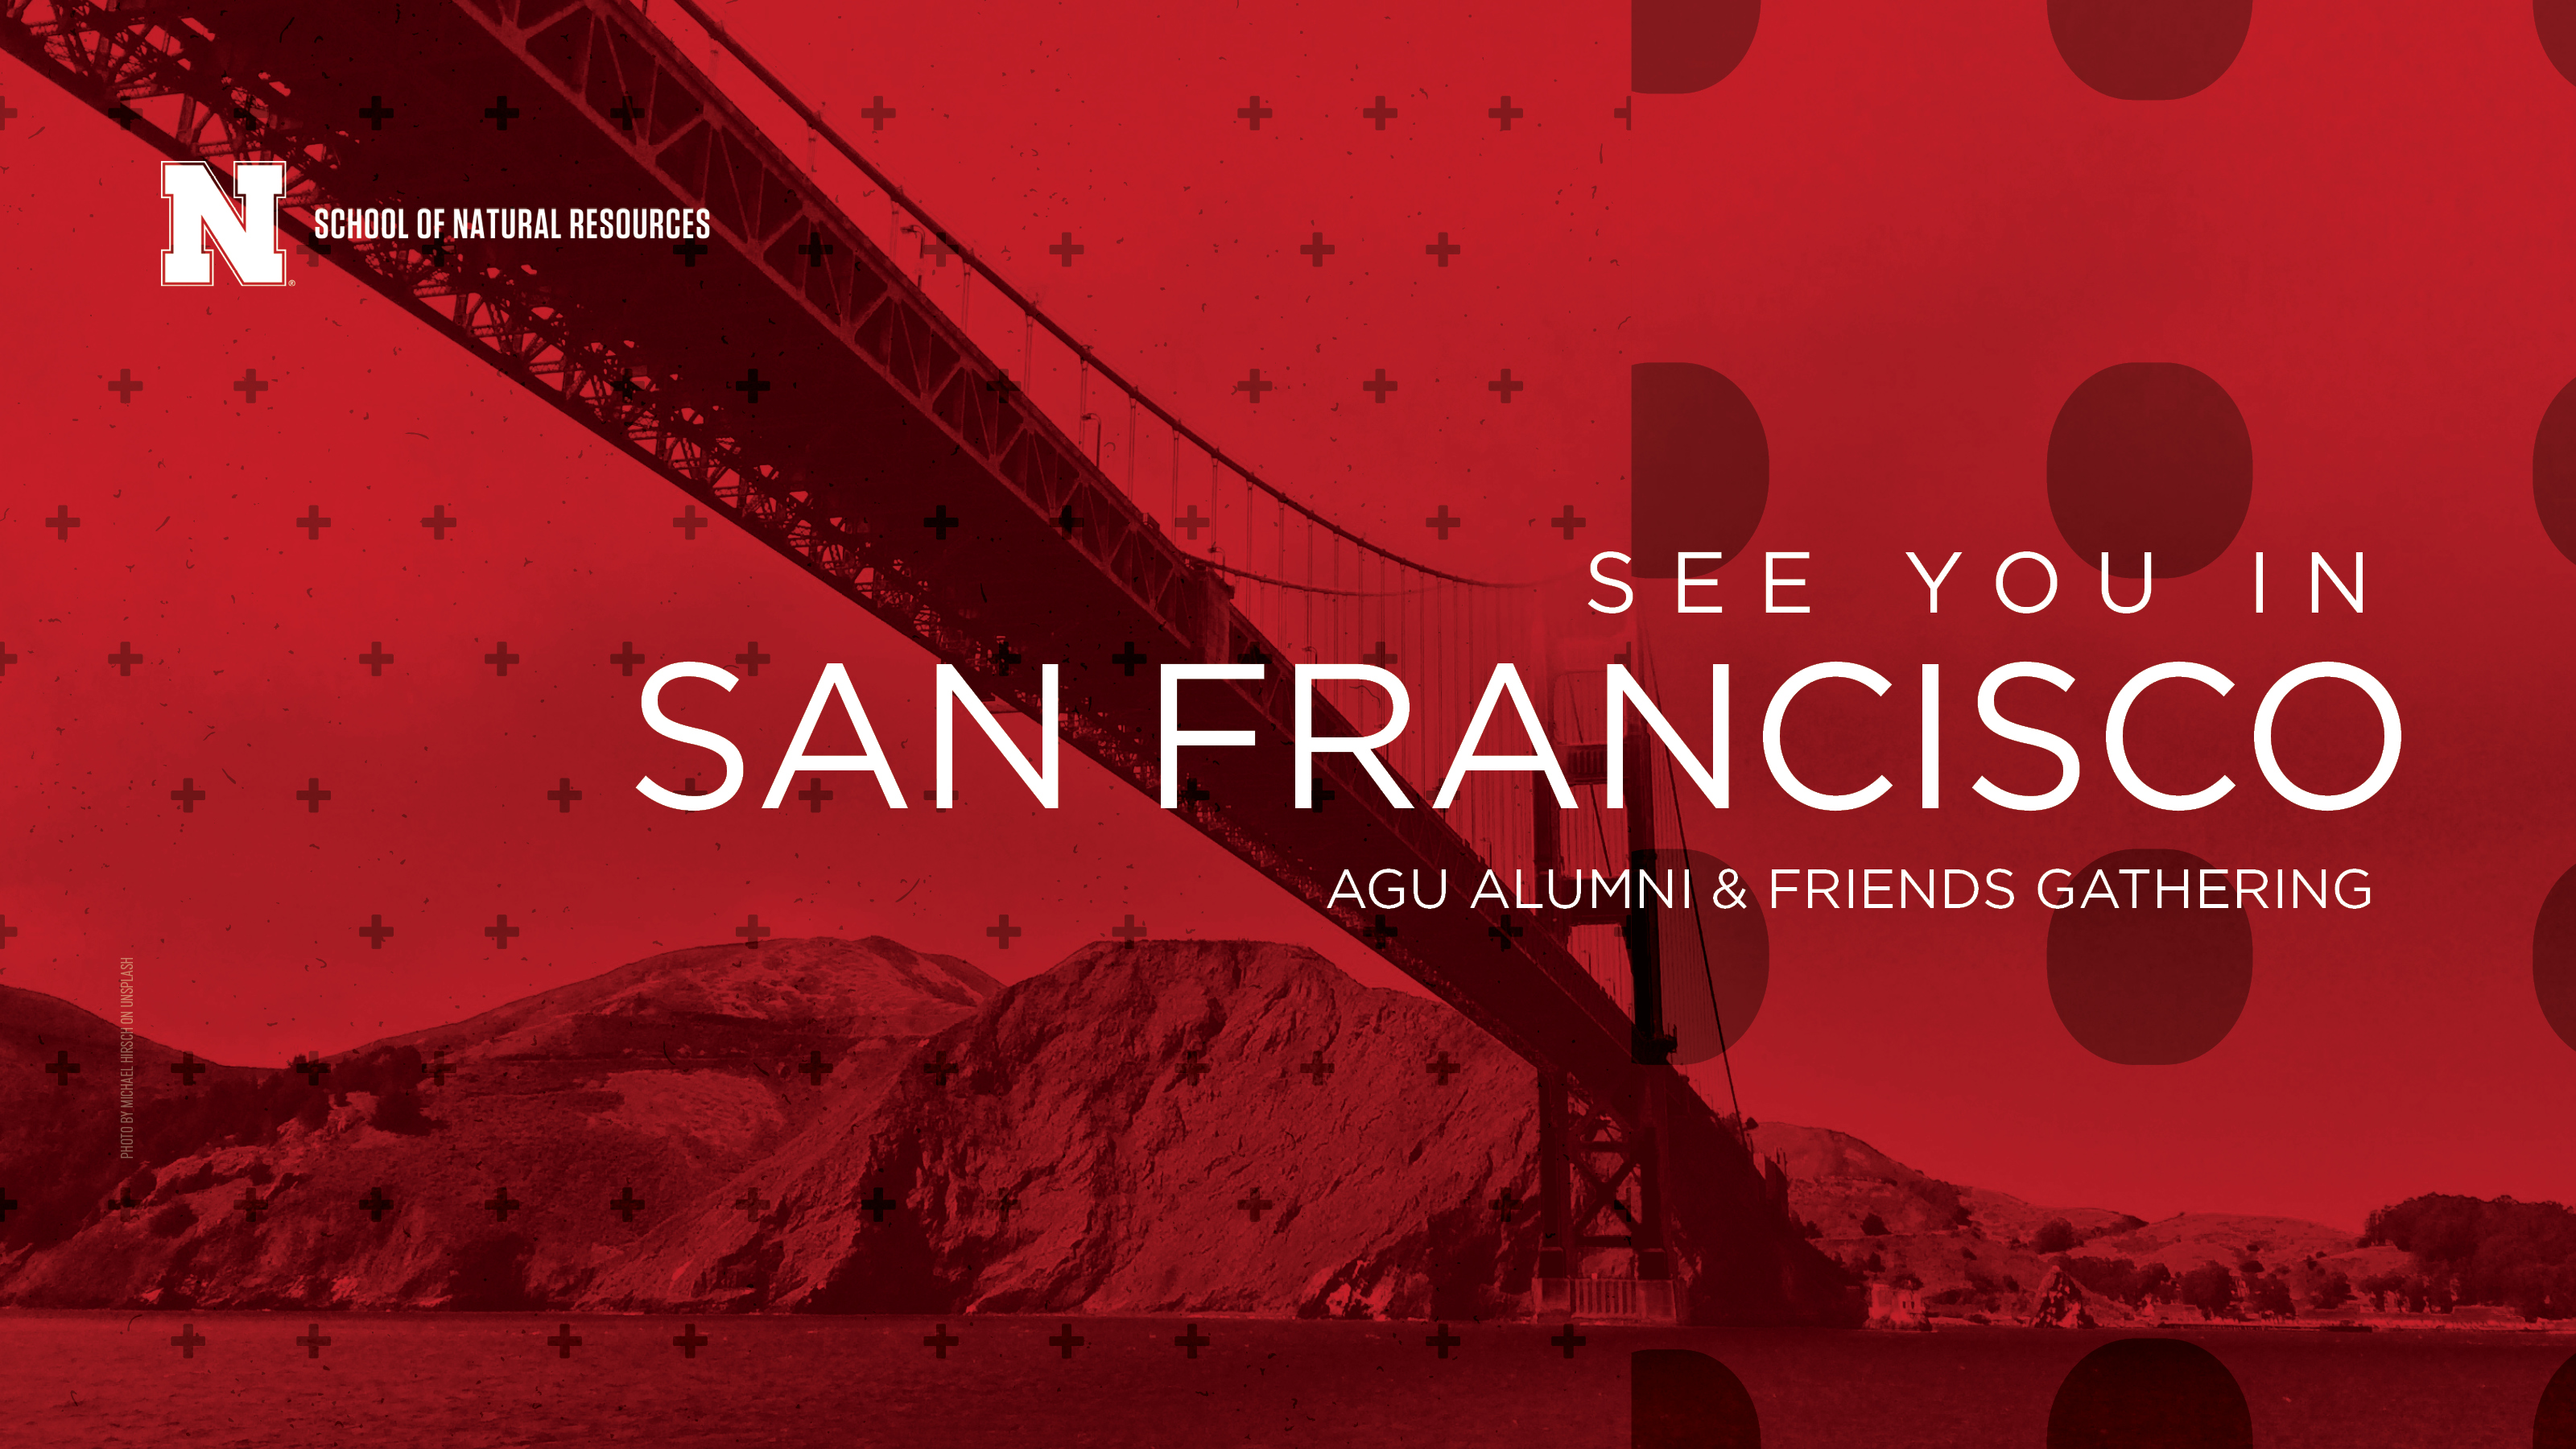 SNR is hosting an alumni and friends gathering during the American Geophysical Union 2019 Fall Meeting and Centennial Celebration set for Dec. 9 to 13 in San Francisco.